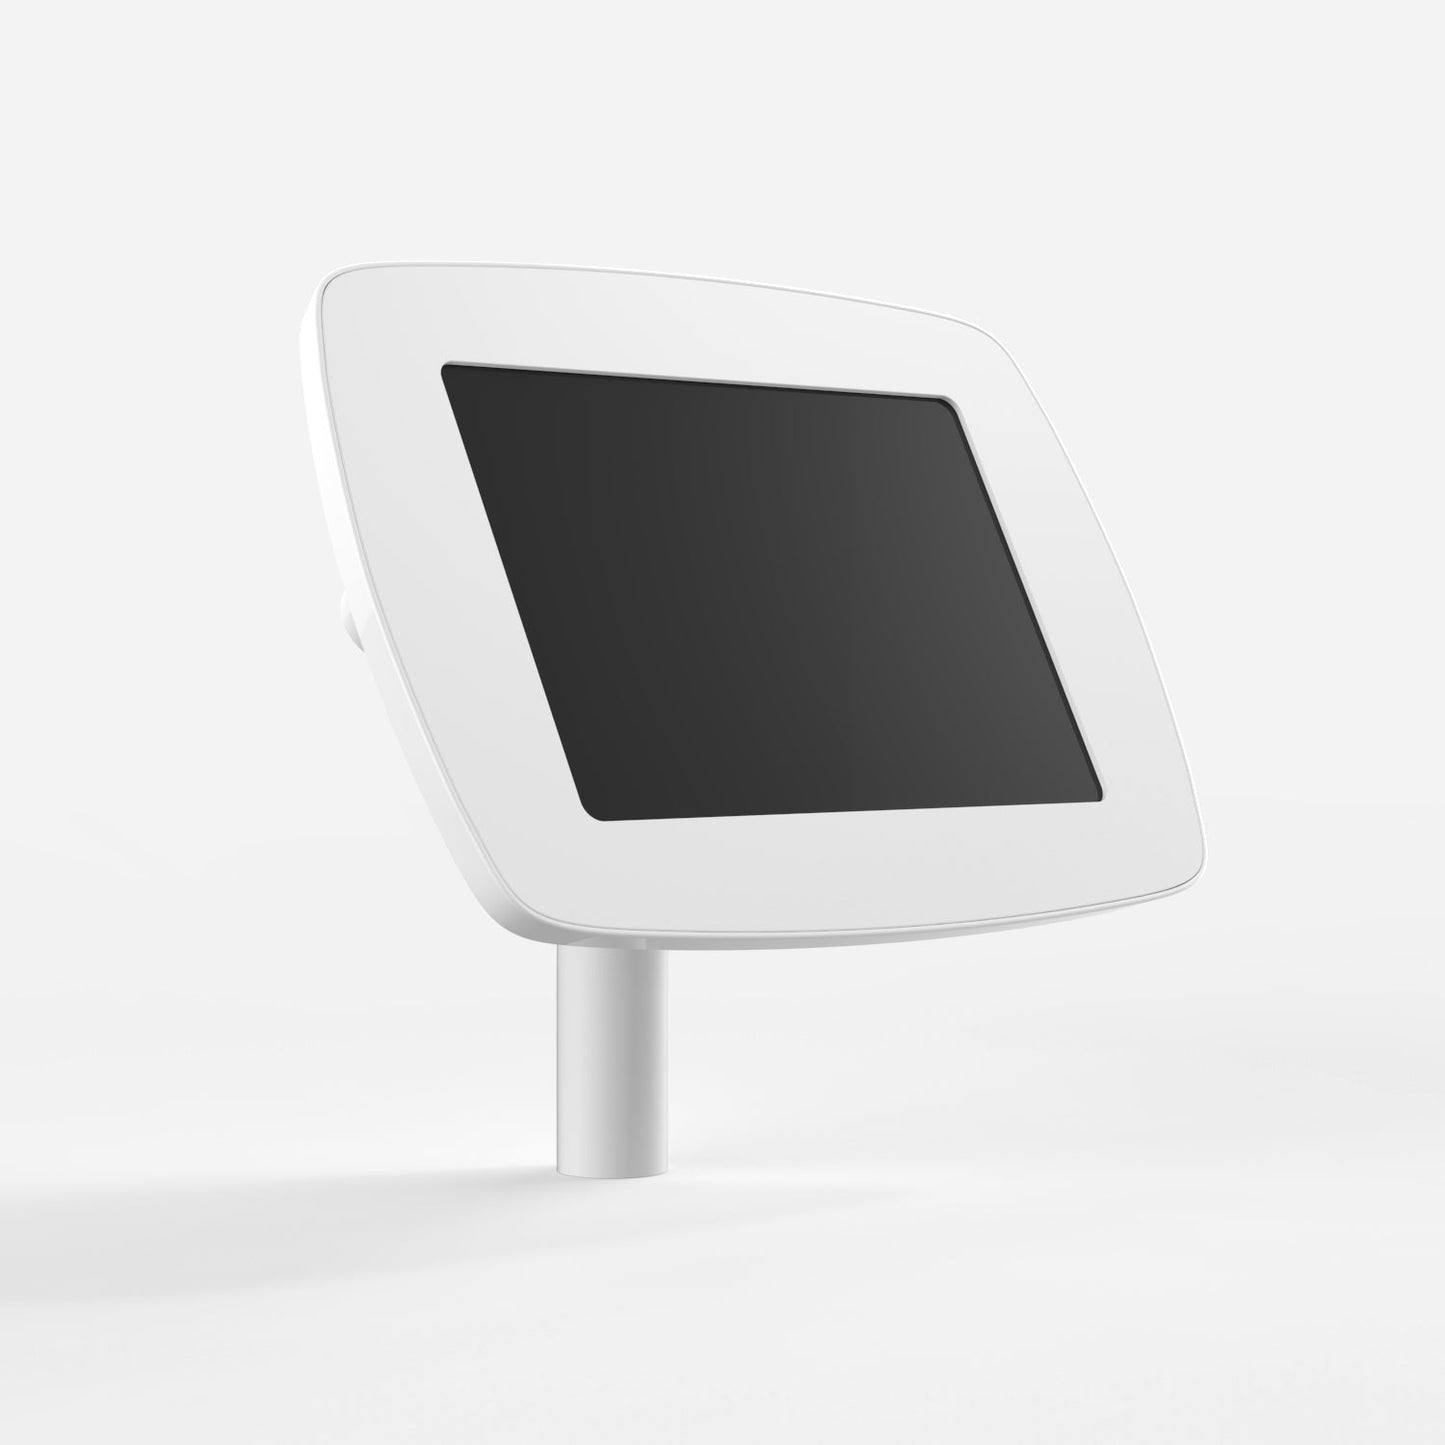 Bouncepad Static 60 - A secure tablet & iPad desk mount in white.